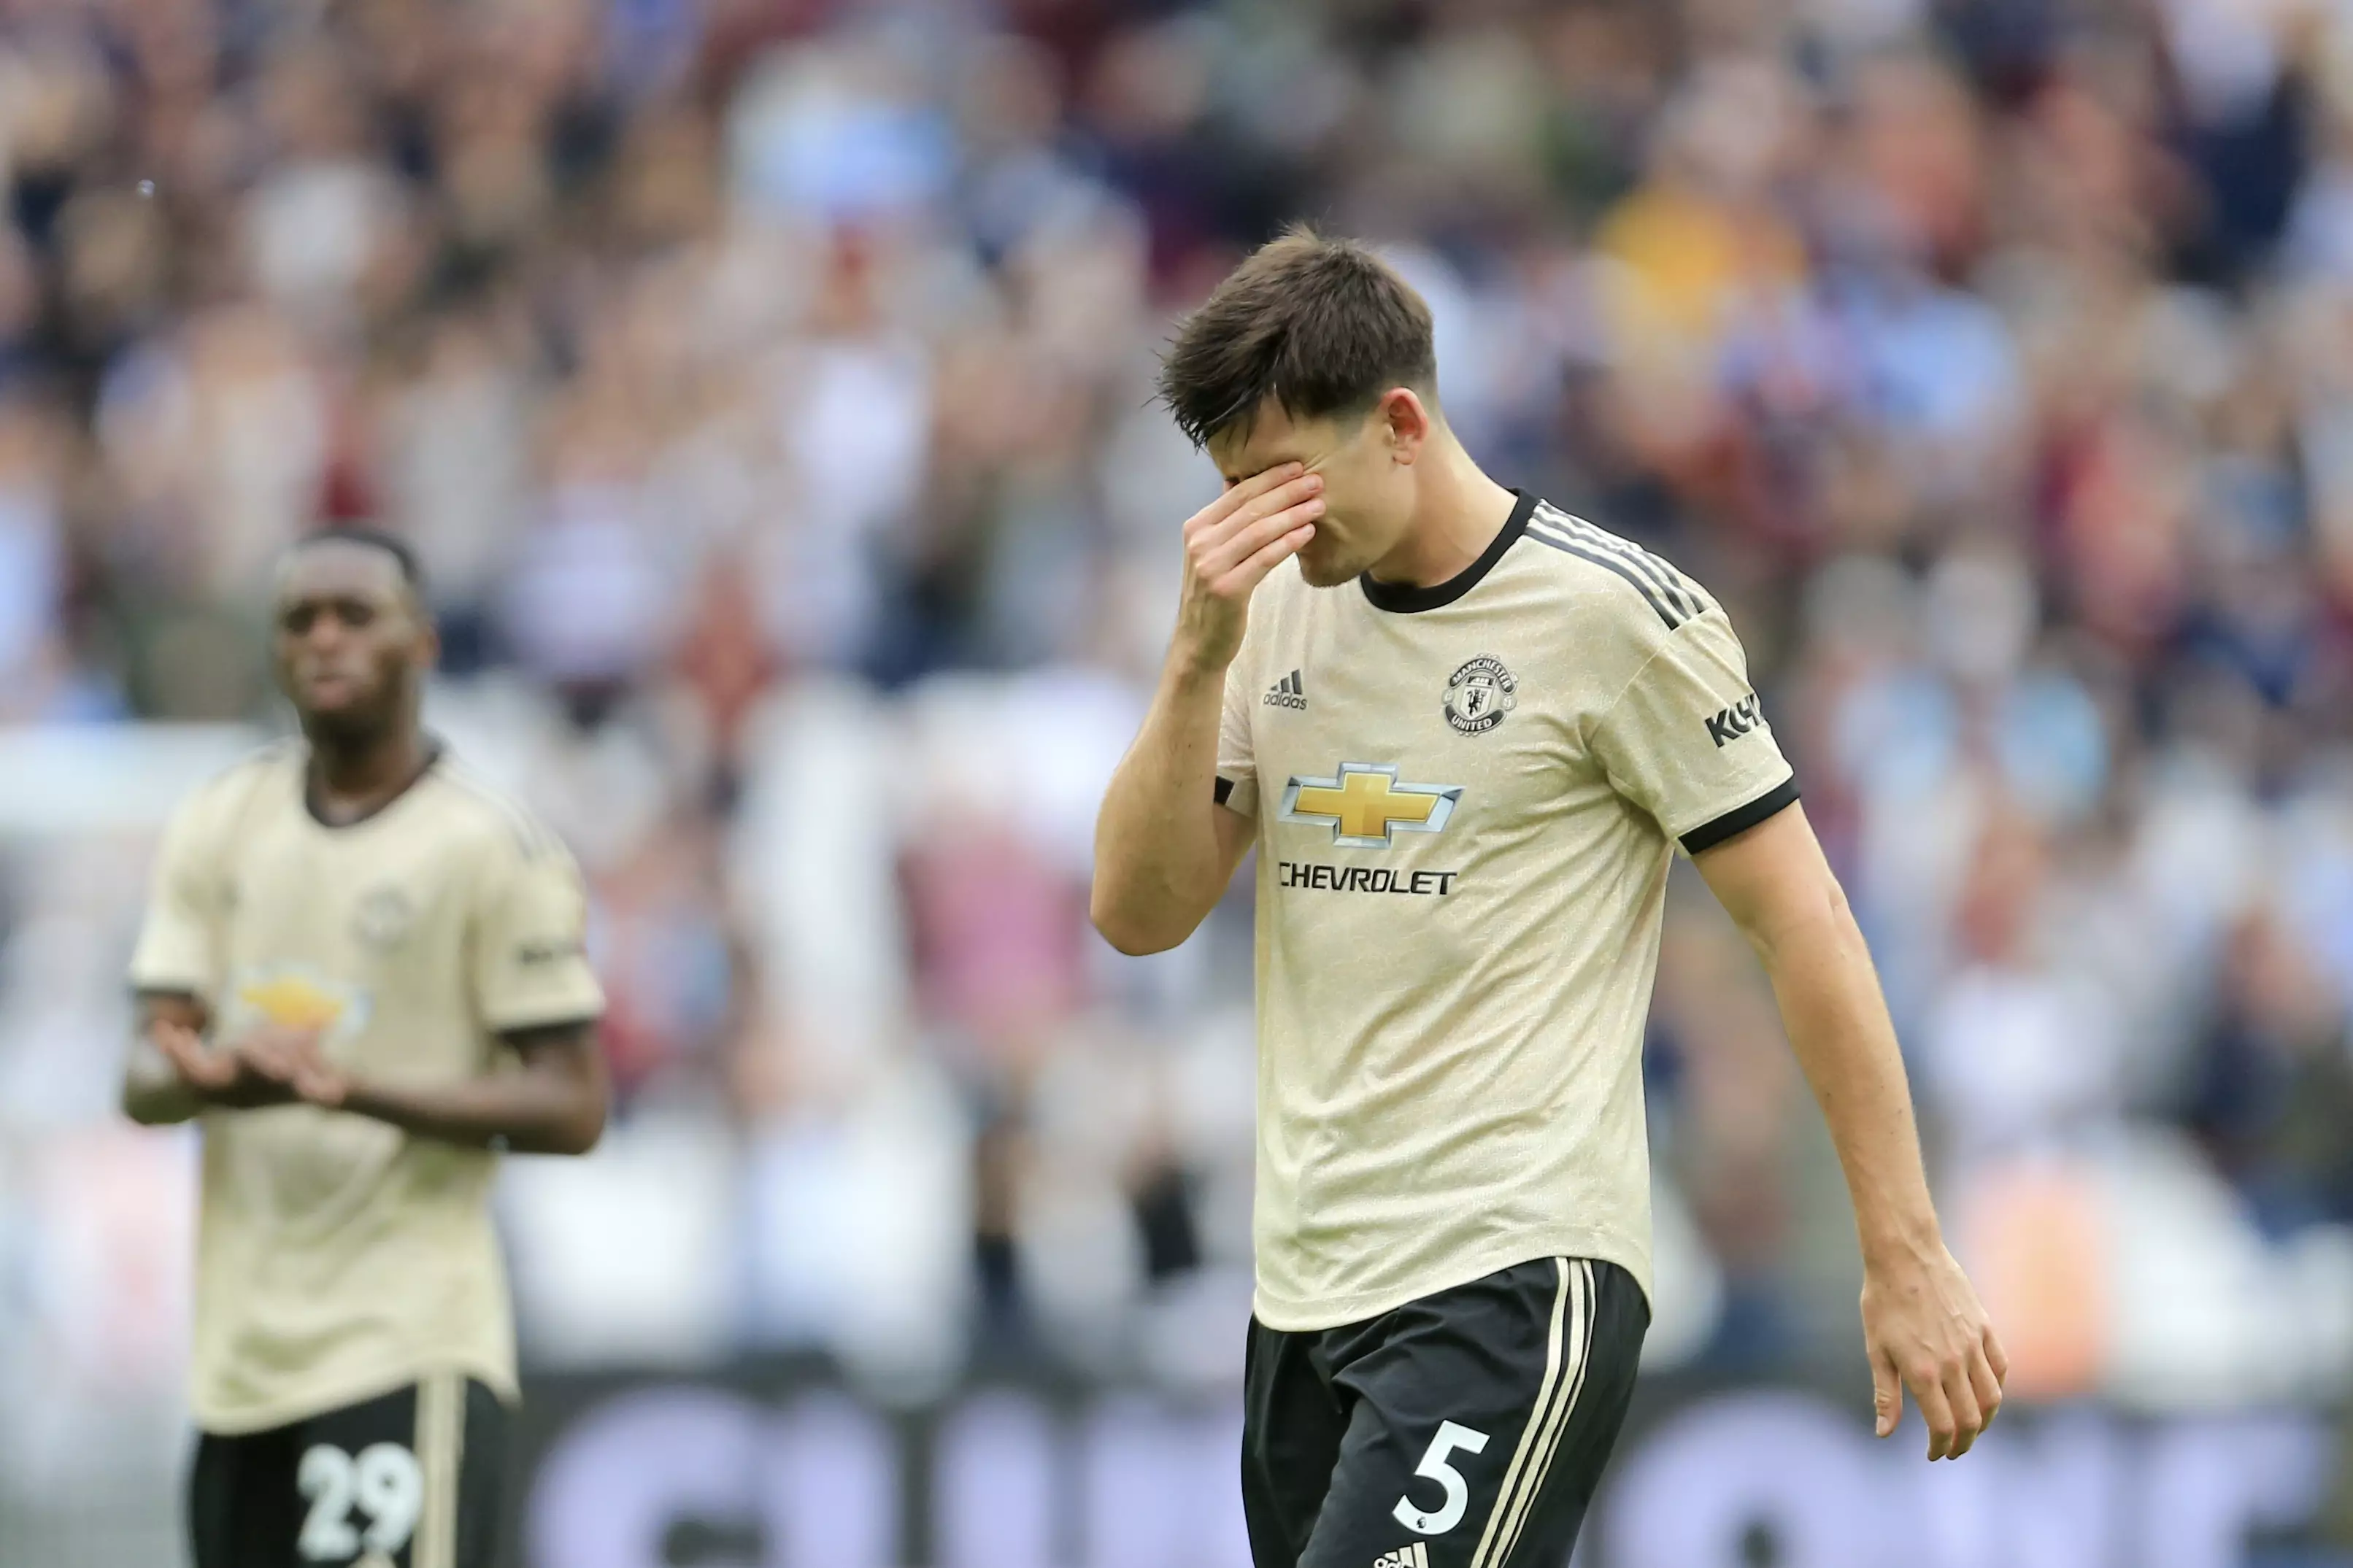 Harry Maguire trying not to watch United's performance, fans will relate. Image: PA Images